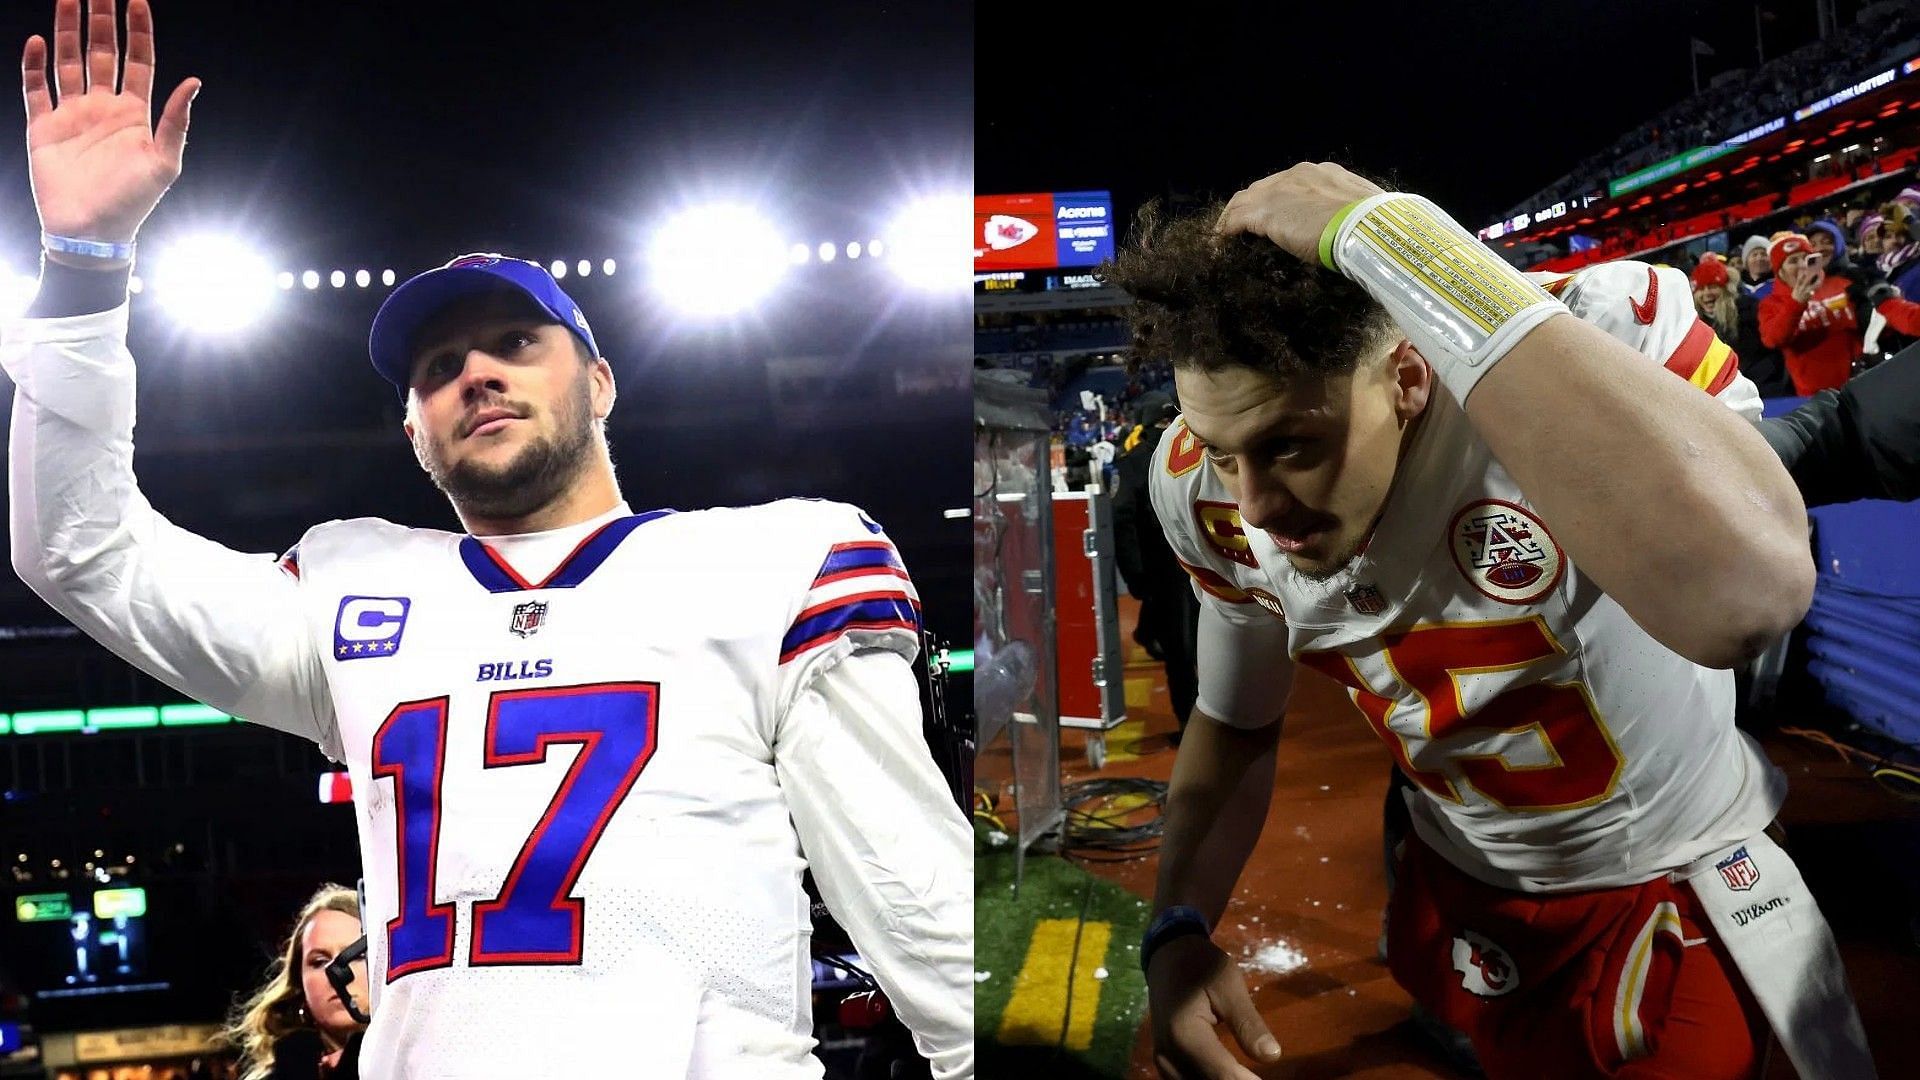 Fact check: Did Bills turn off hot water in Chiefs locker room after Divisional Playoff showdown?